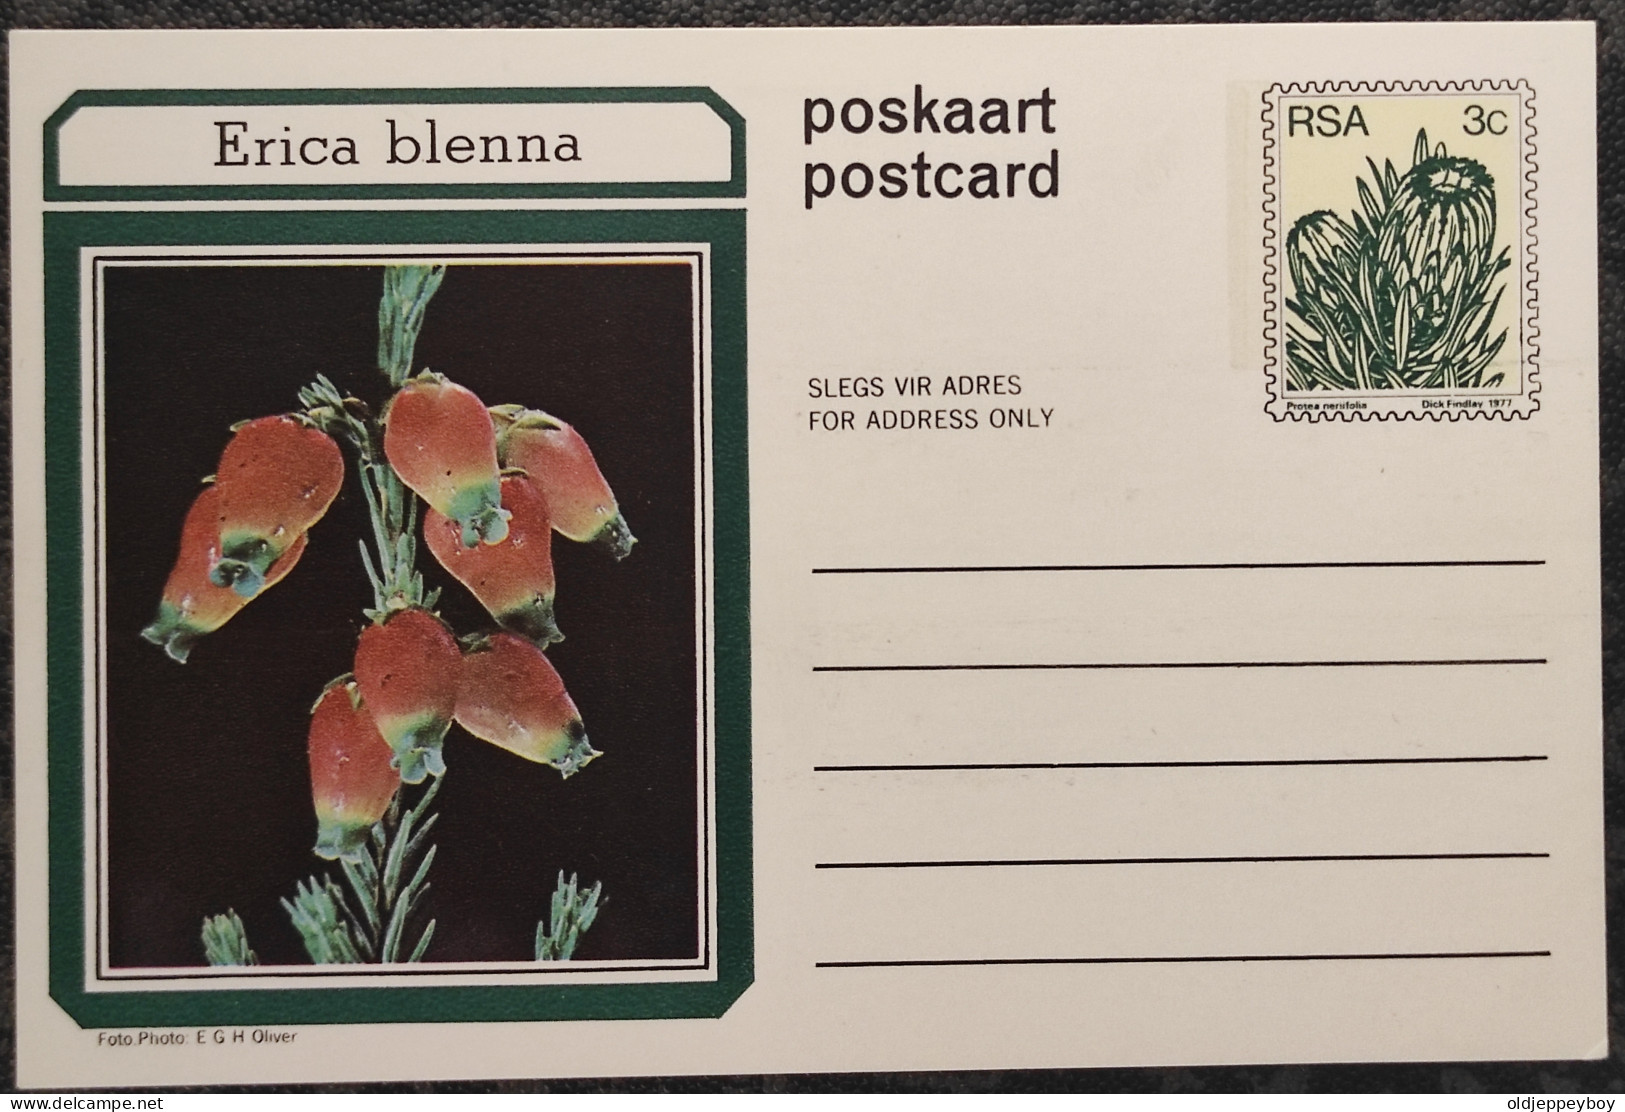 3c SOUTH AFRICA Postal STATIONERY CARD Illus ERICA BLENNA FLOWER Cover Stamps Flowers Rsa - Lettres & Documents